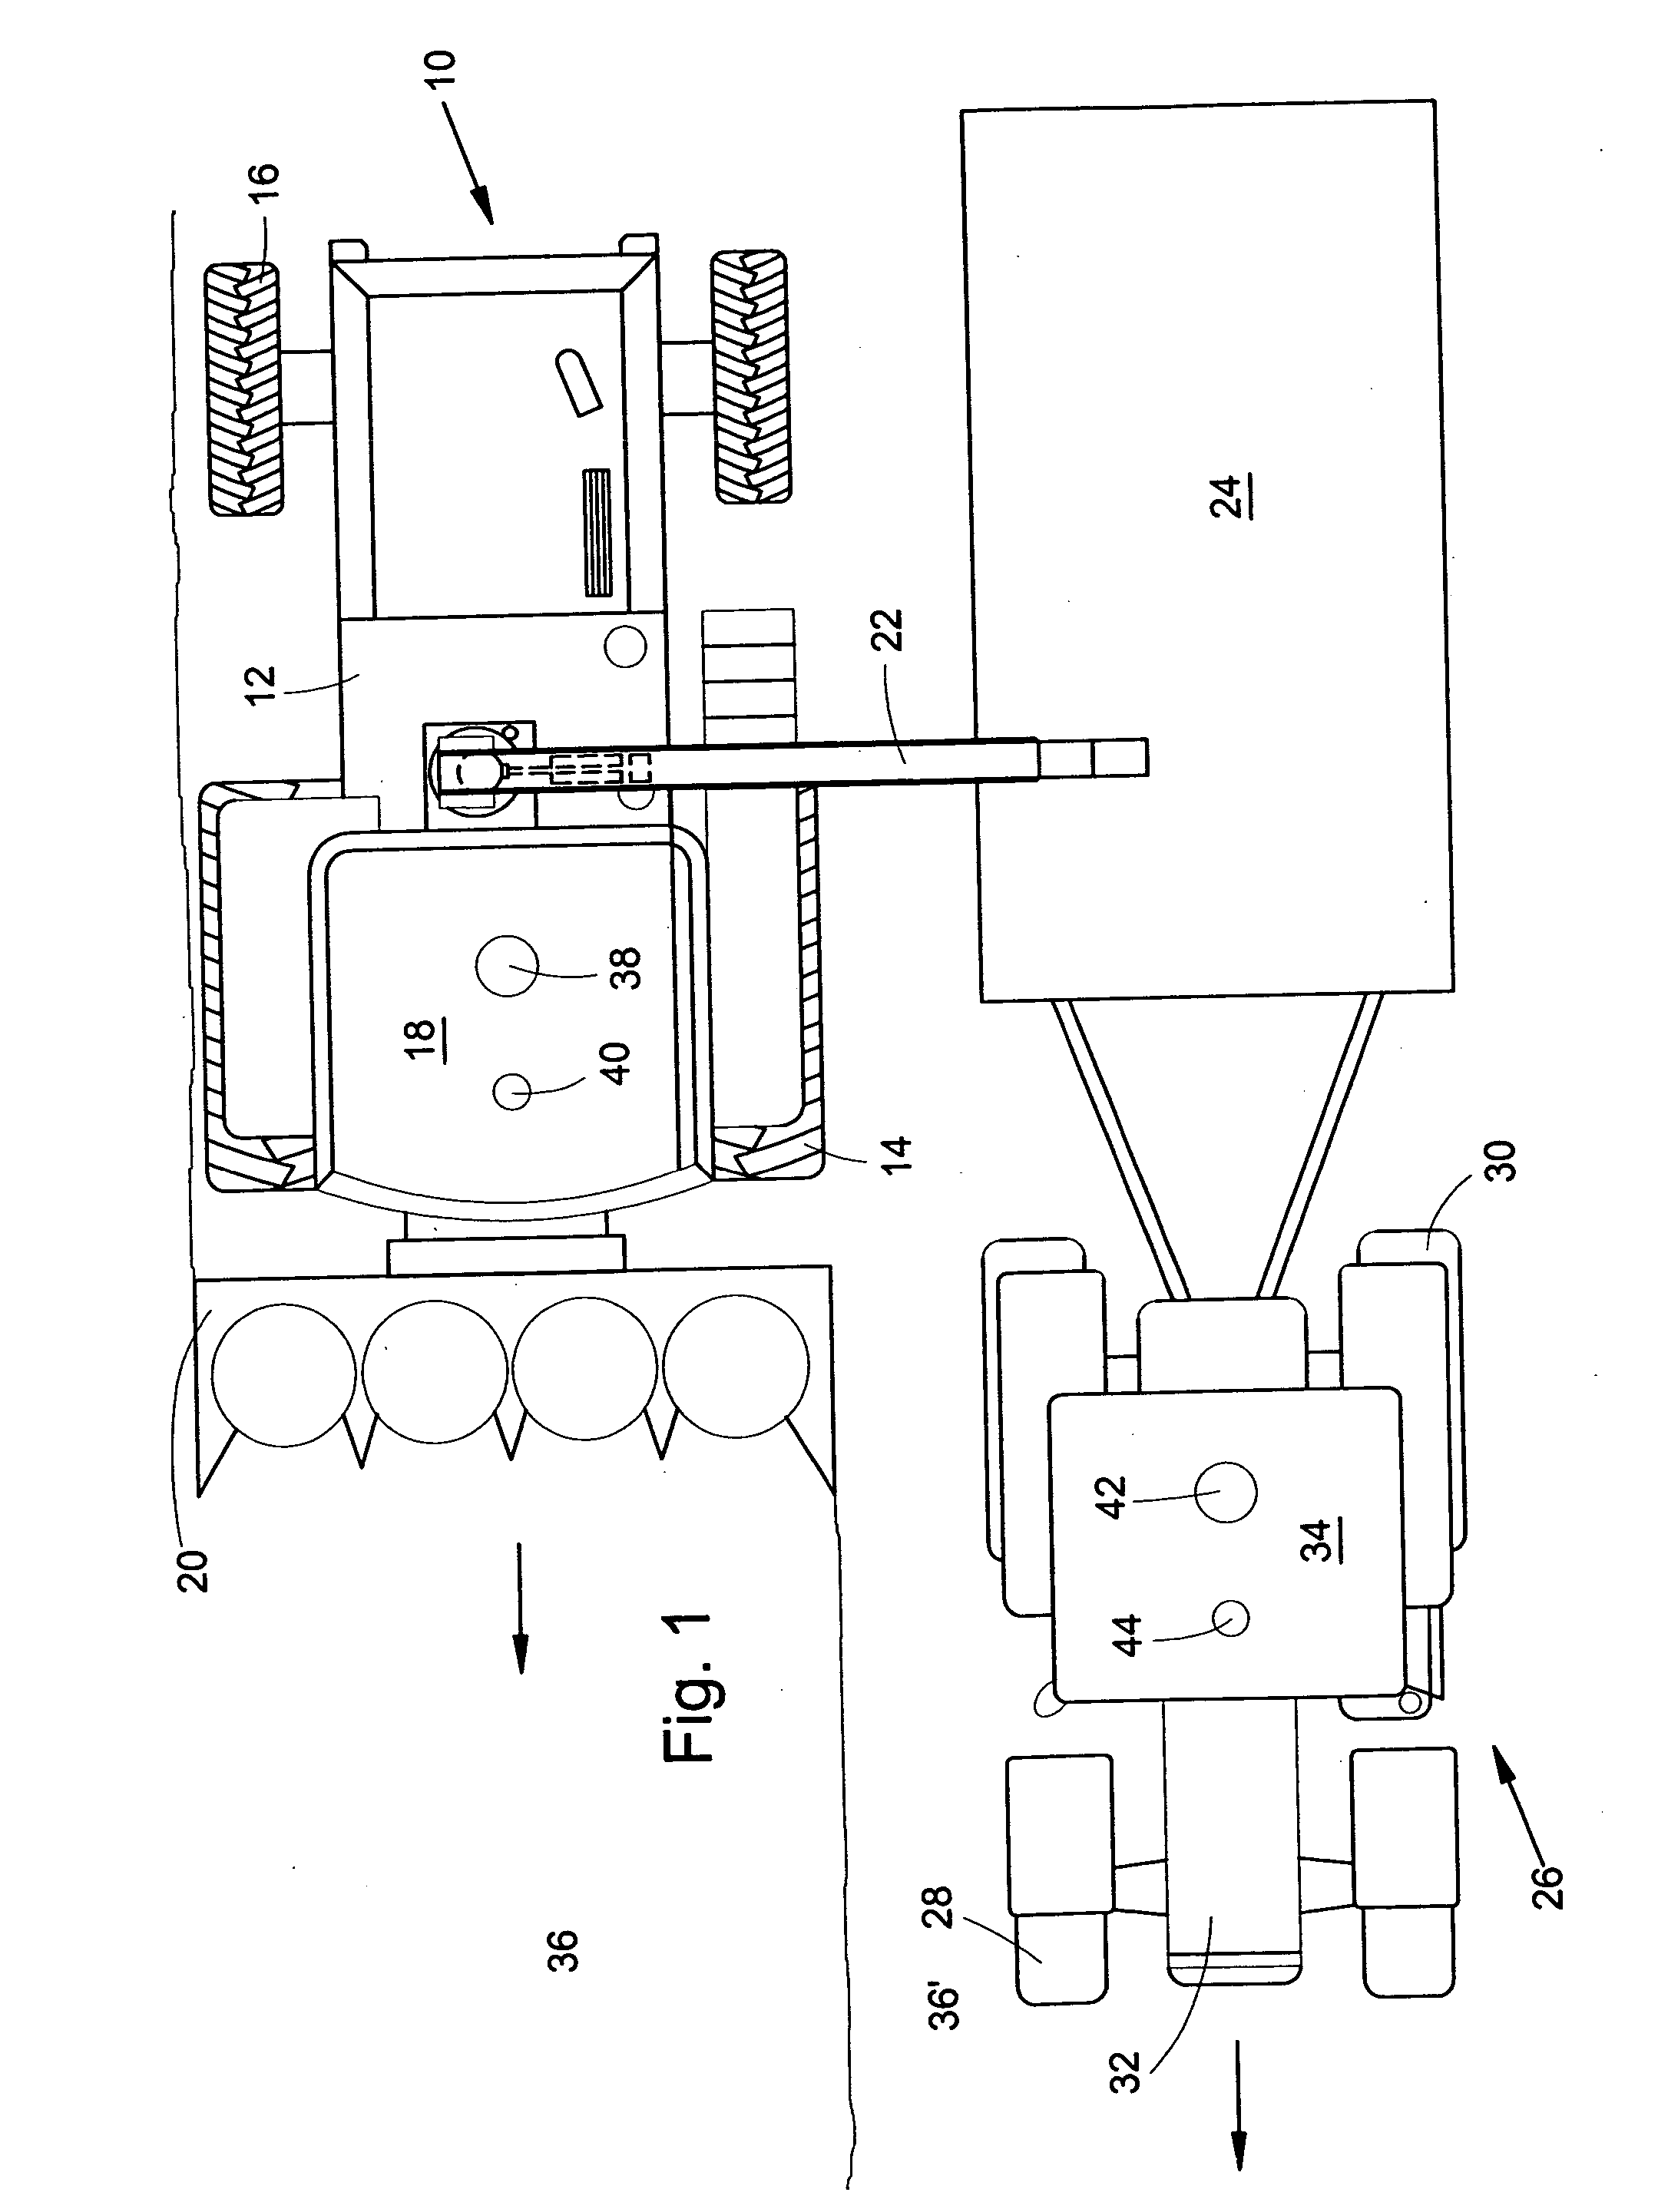 System for determining the relative position of a second farm vehicle in relation to a first farm vehicle